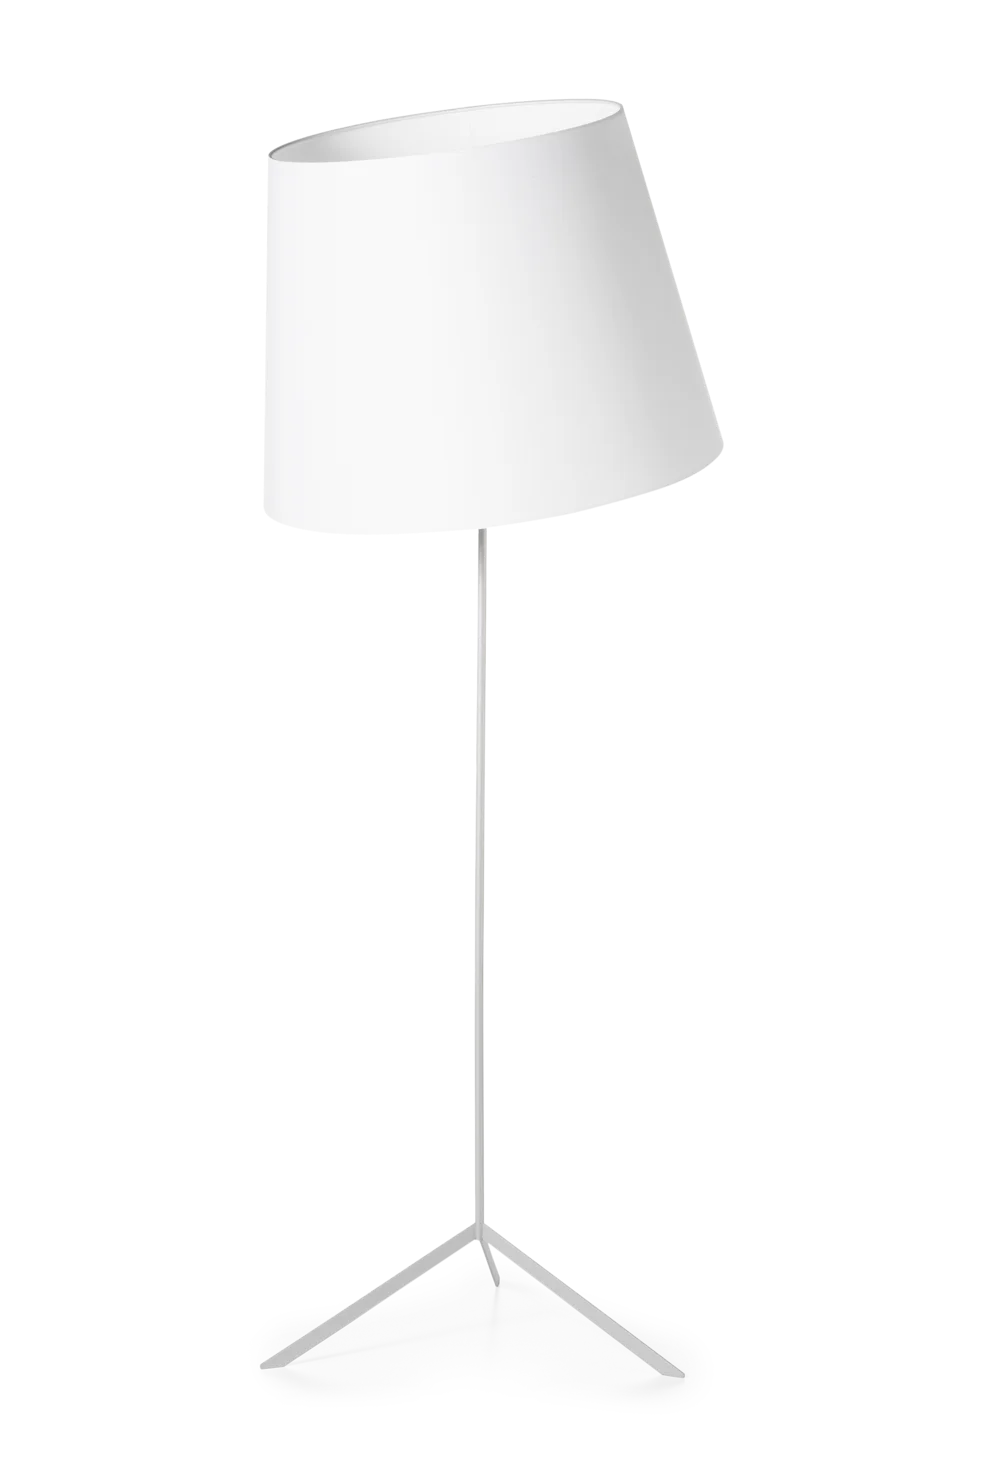 Double Shade floor lamp front view